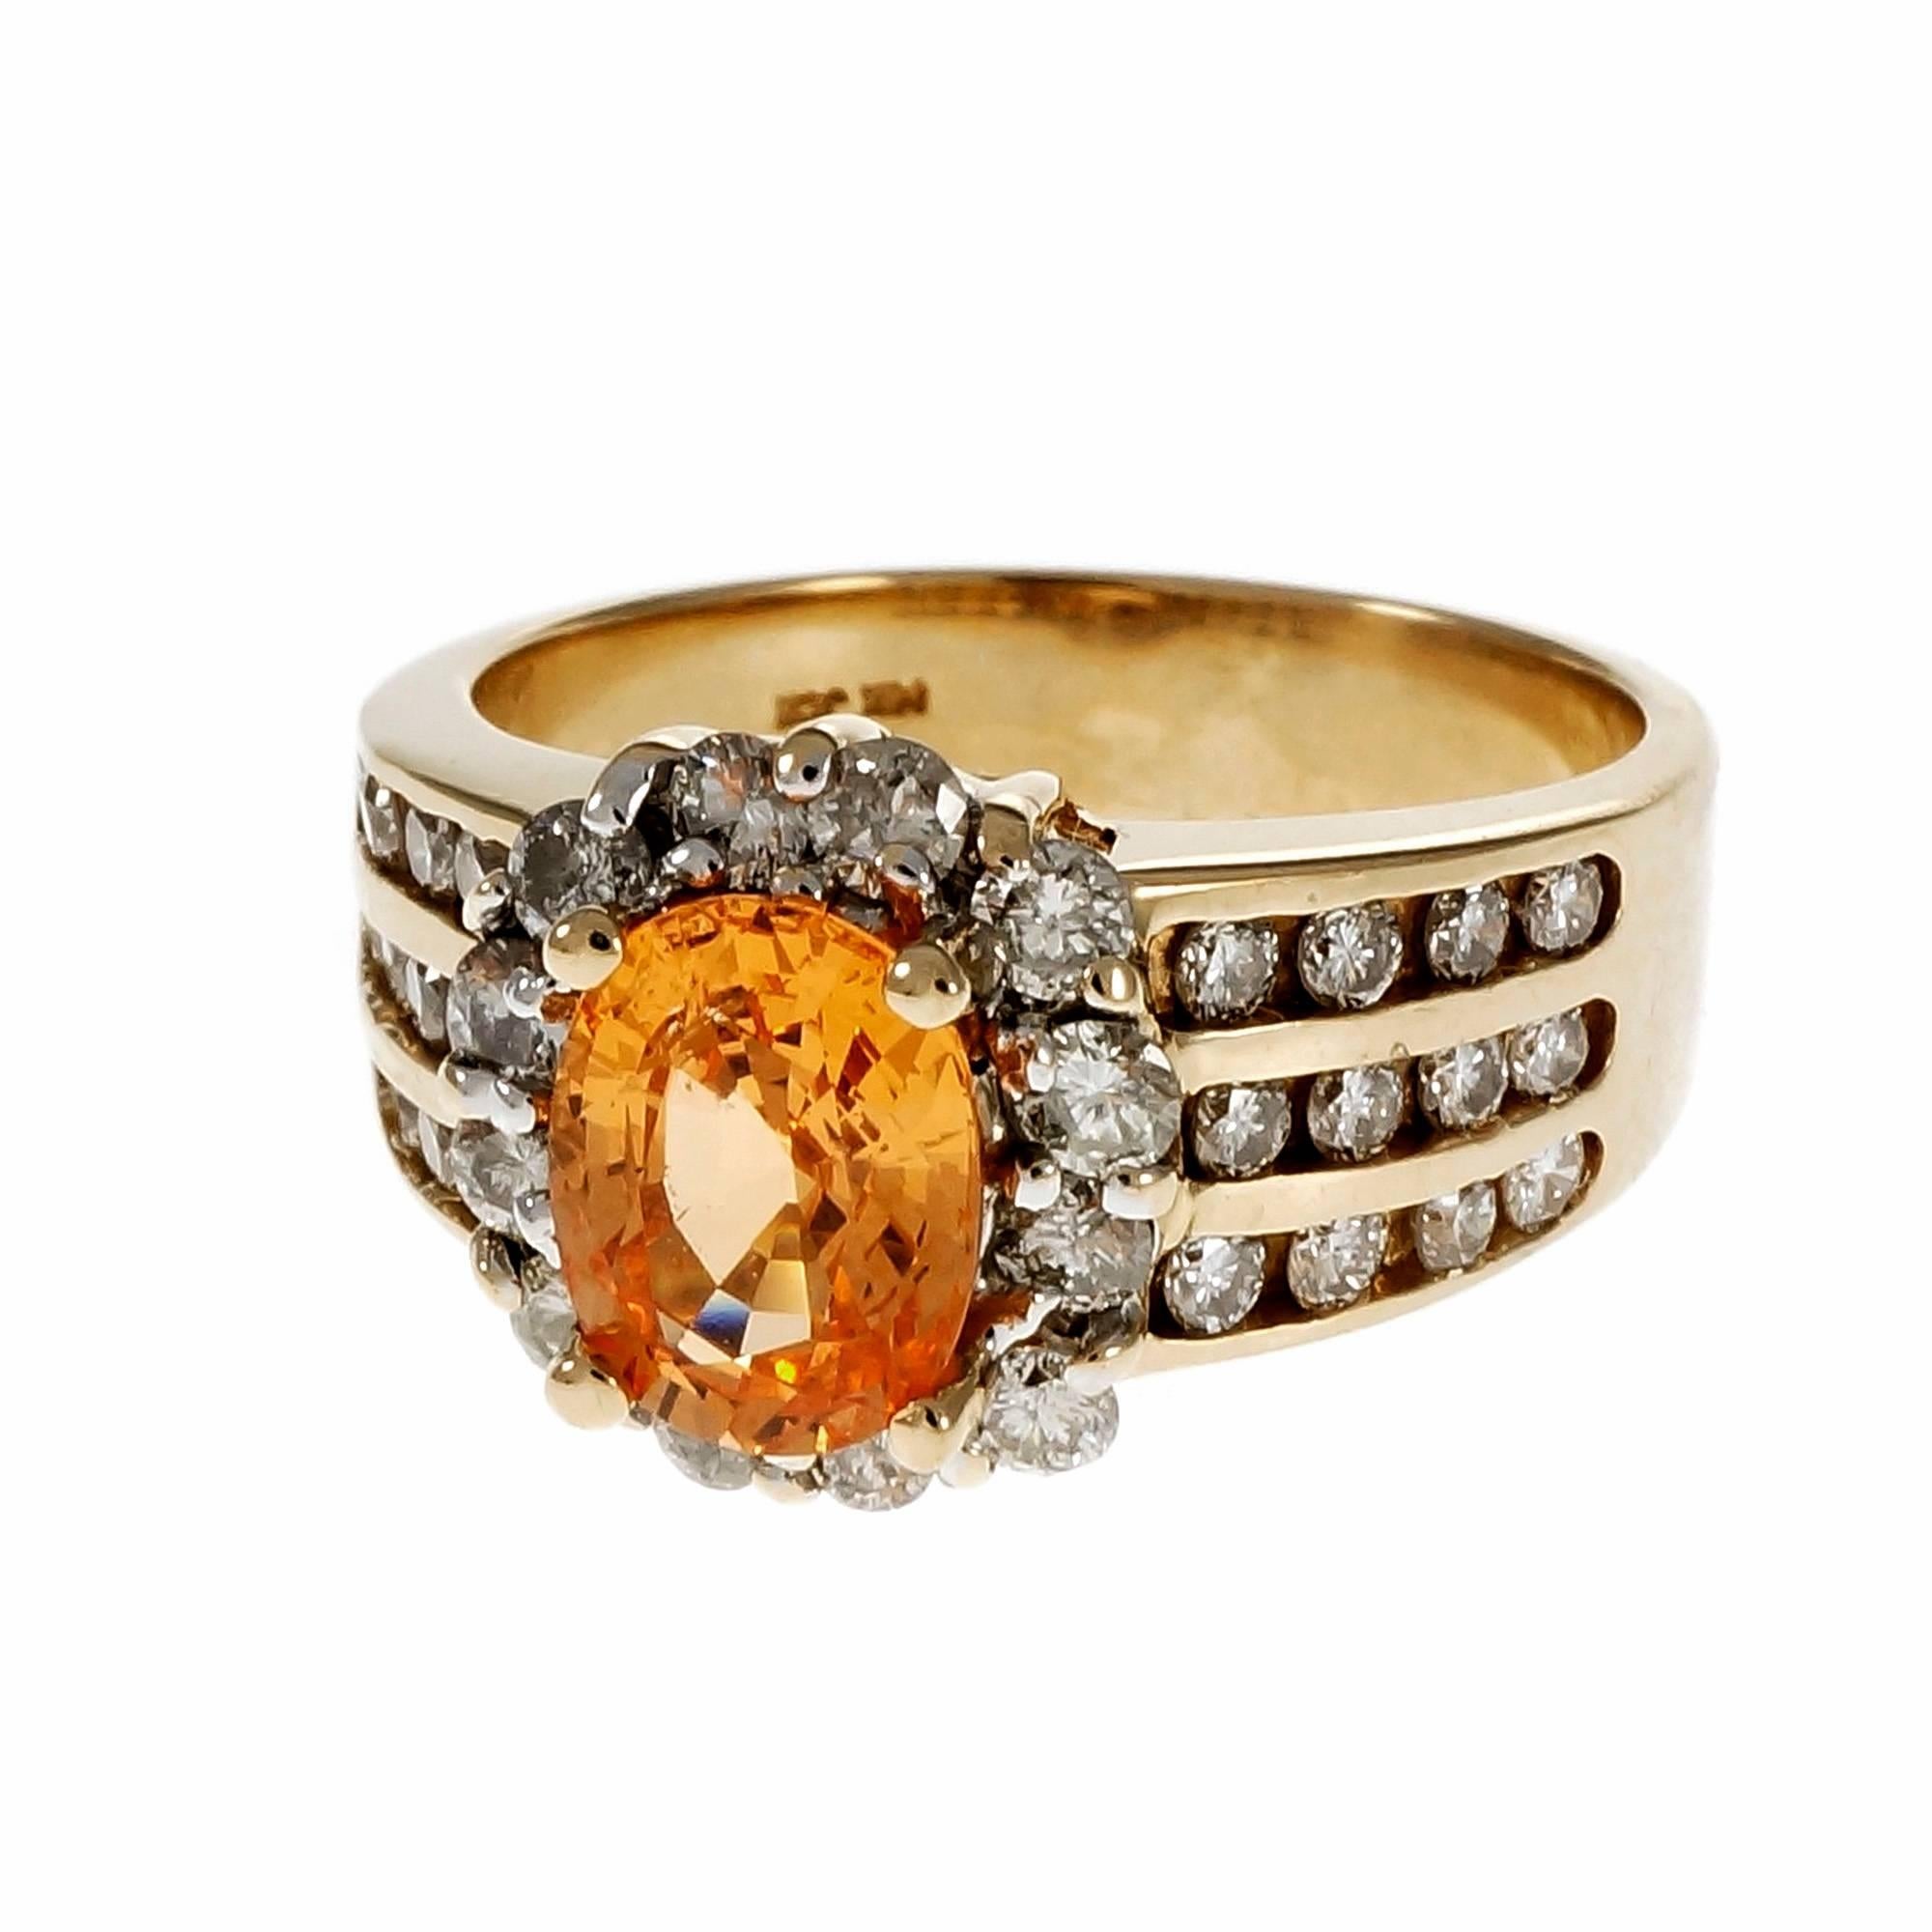 Estate bright orange Spessartite Garnet with a diamond halo and three rows of Diamonds on each side in a 14k yellow gold setting. 

1 oval Spessartite orange Garnet, approx. total weight 1.81cts, VS
36 round full cut Diamonds, approx. total weight